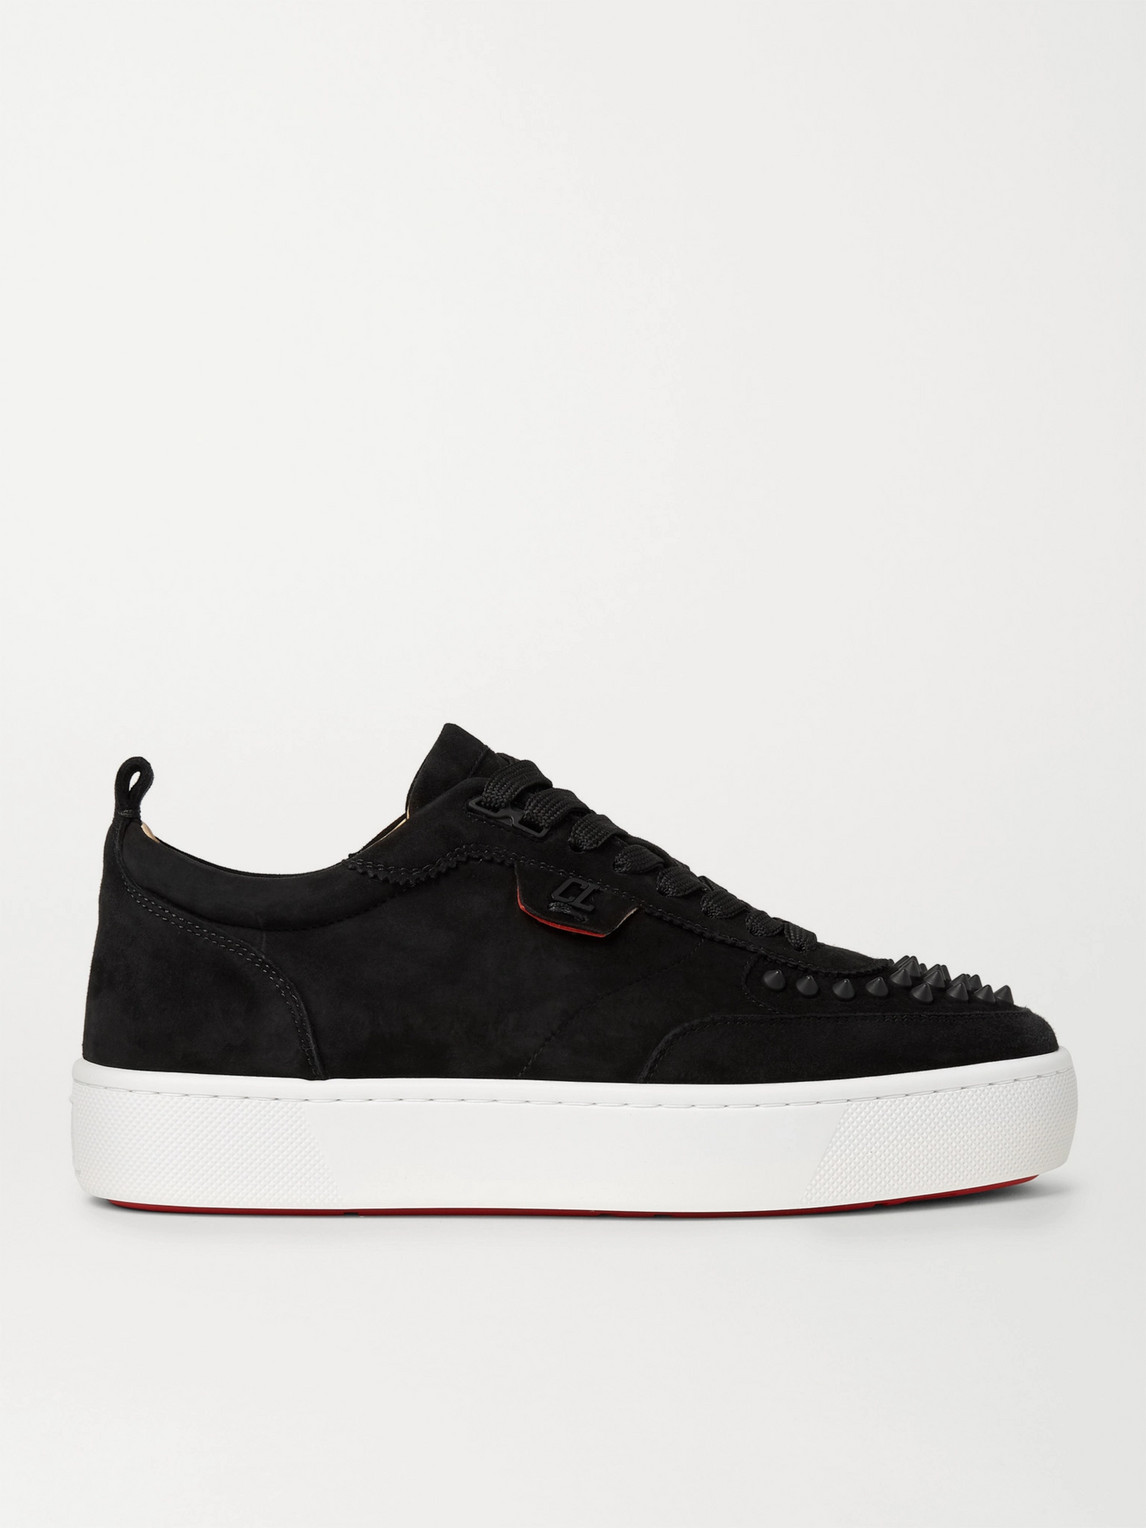 CHRISTIAN LOUBOUTIN HAPPYRUI SPIKED SUEDE SNEAKERS